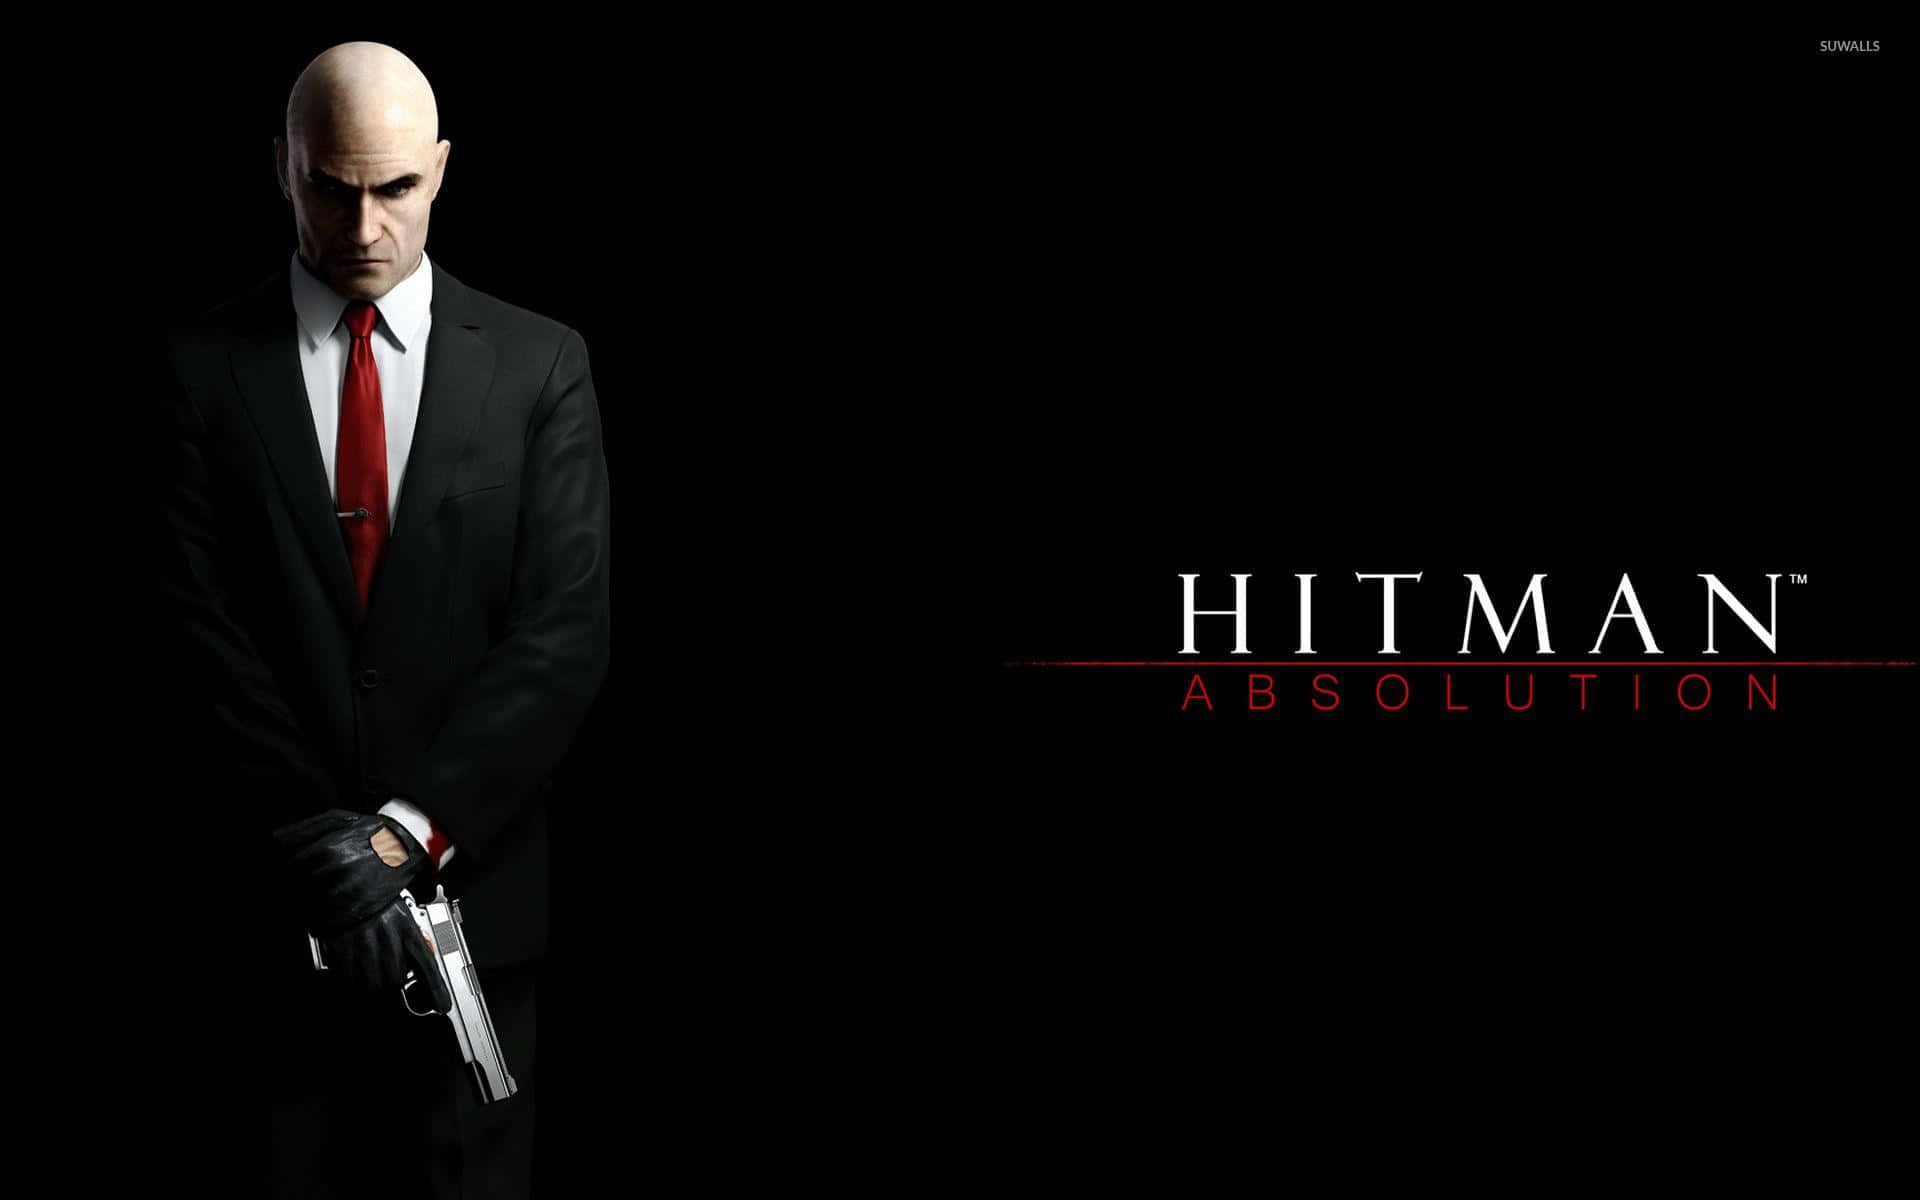 "Live the life of an assassin in the immersive world of Hitman Absolution"